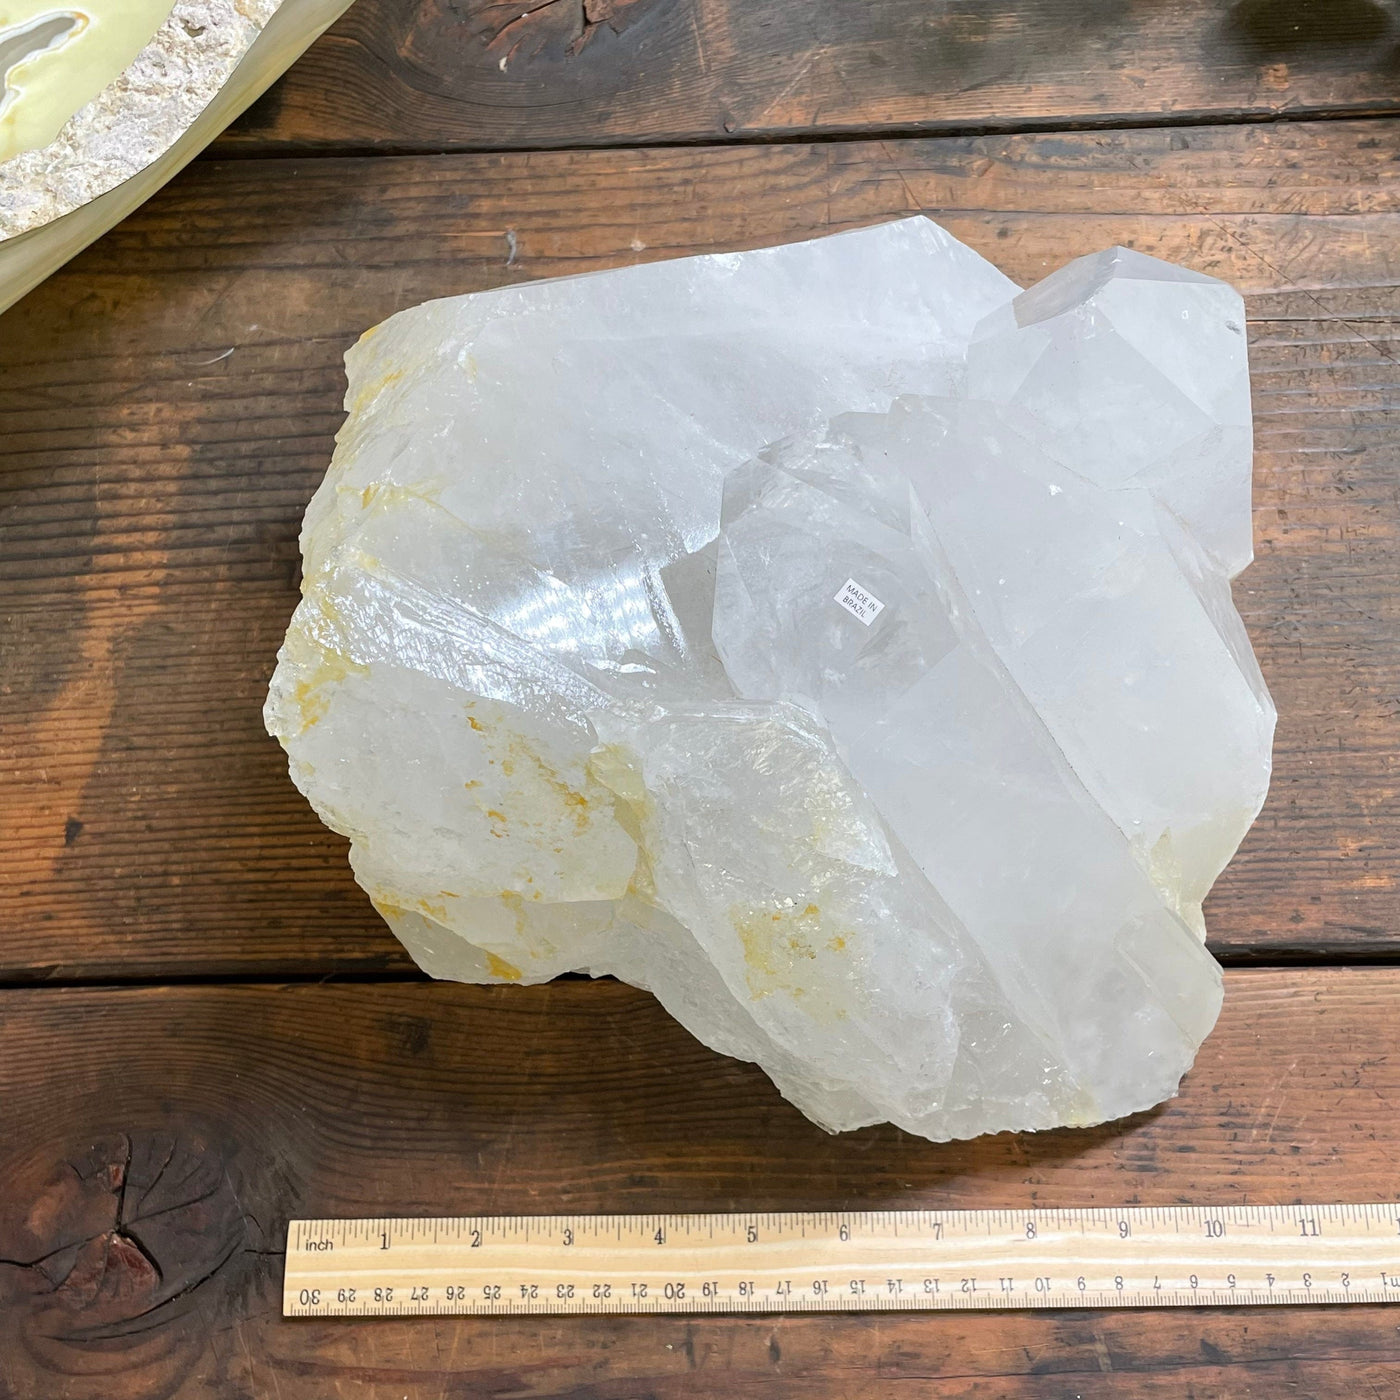 crystal cluster next to a ruler for size reference 